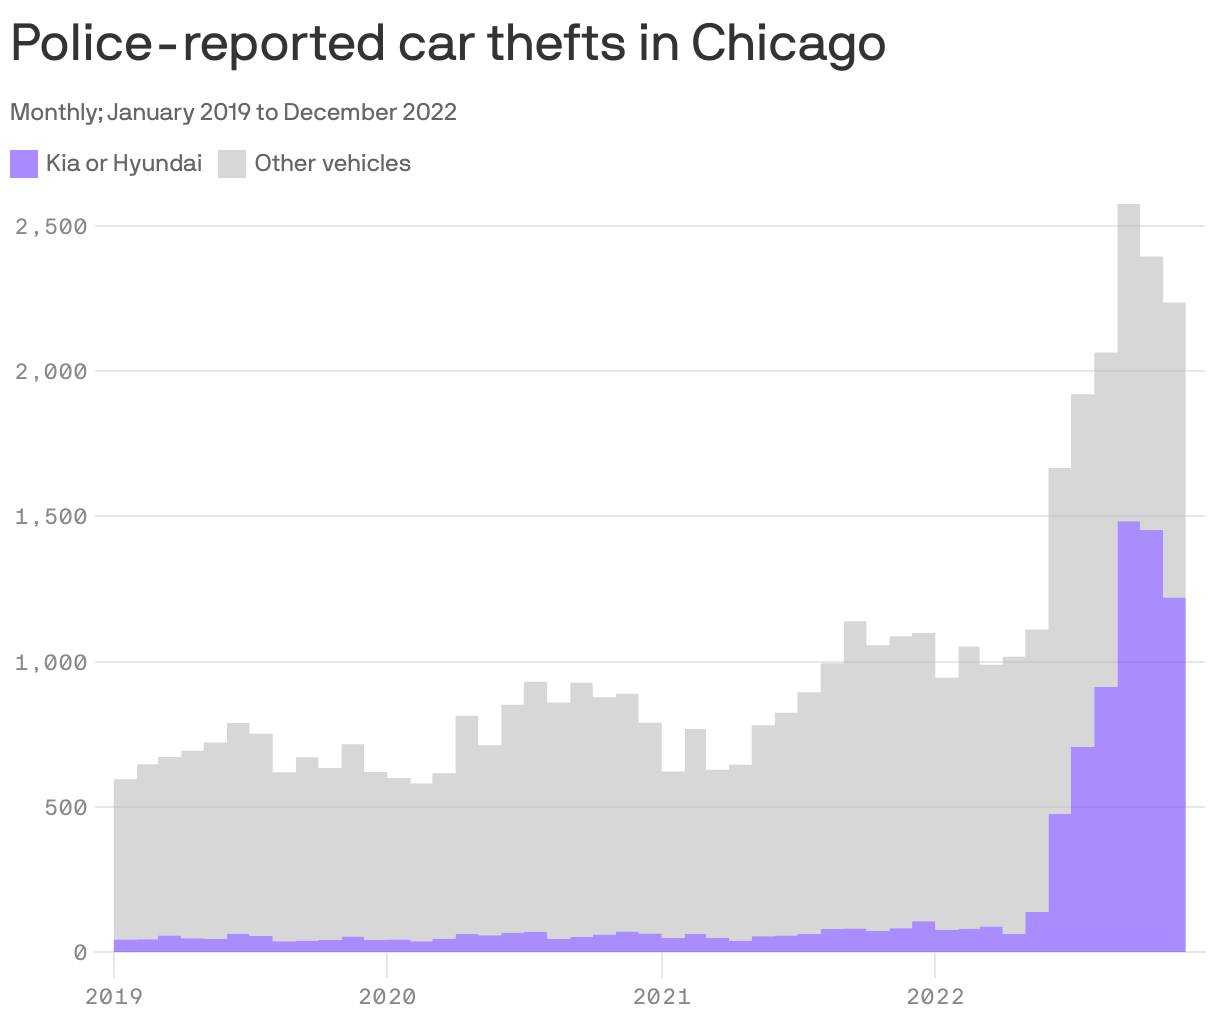 Police-reported car thefts in Chicago